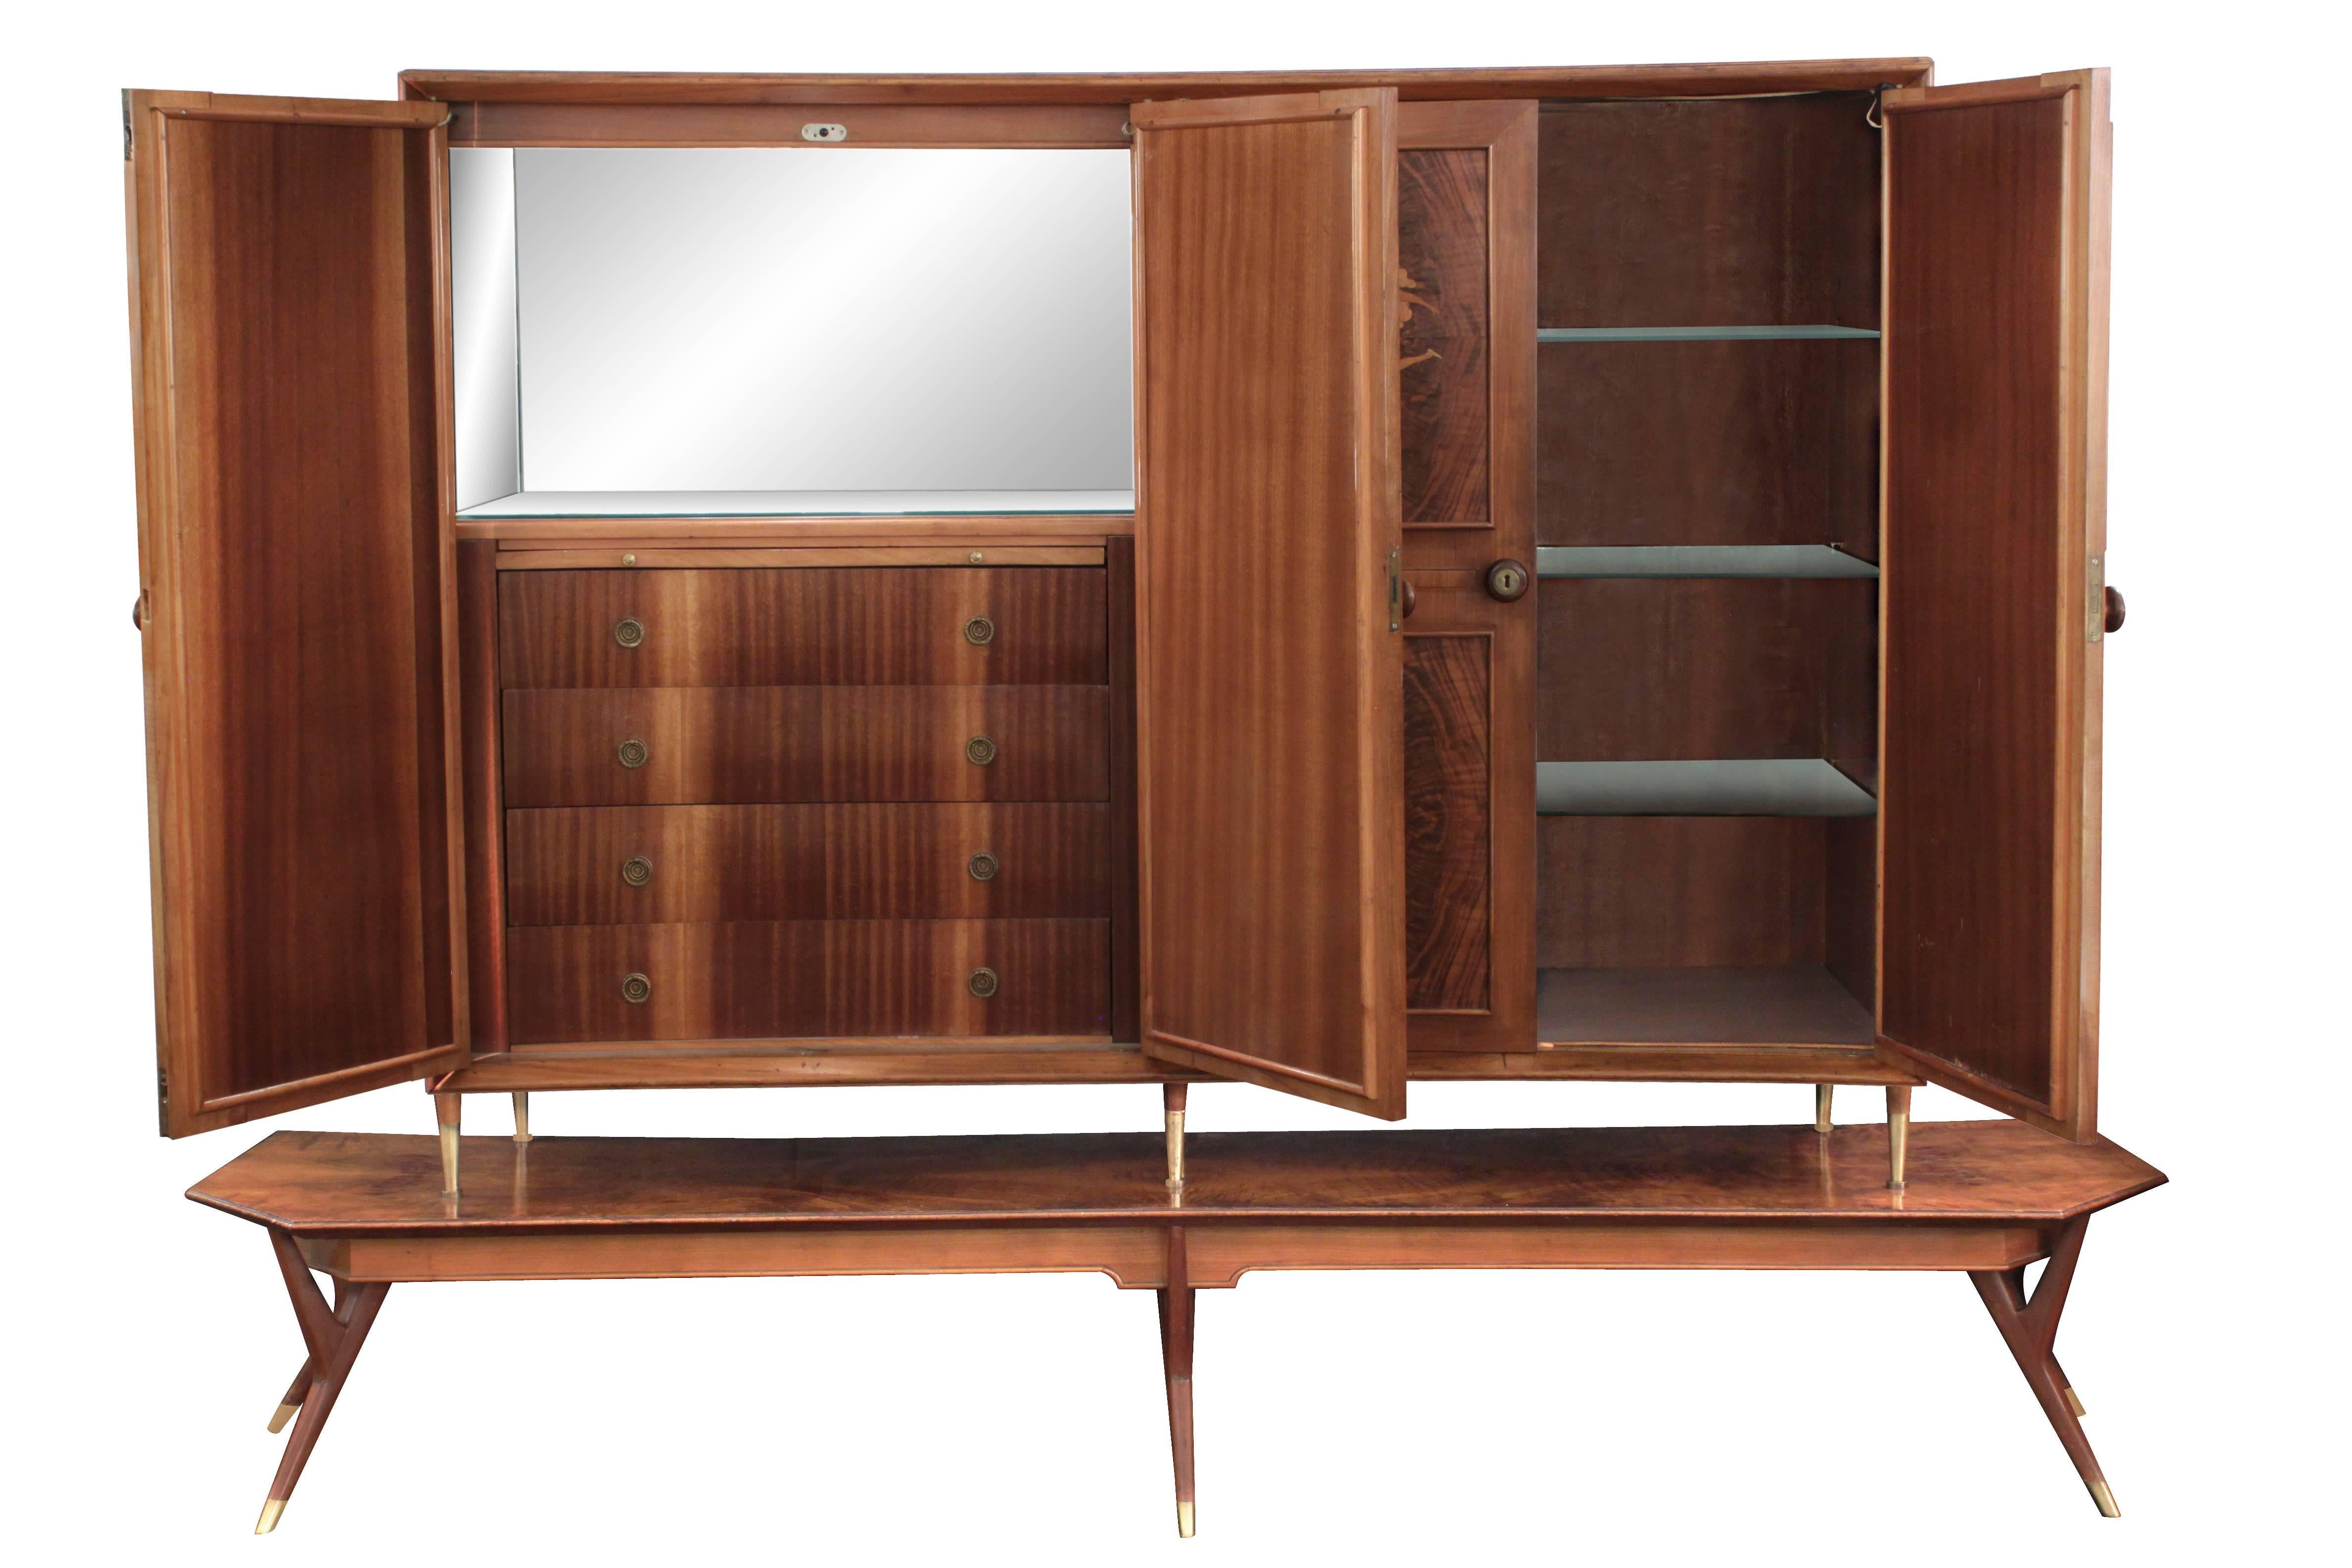 Four-door cabinet with exquisite figural inlays in exotic woods on sculptural base by Eugenio Diez, Buenos Aires, Argentina, 1940s. Each door has two raised and illuminated panels with inlays. The left side interior is an illuminated cabinet with